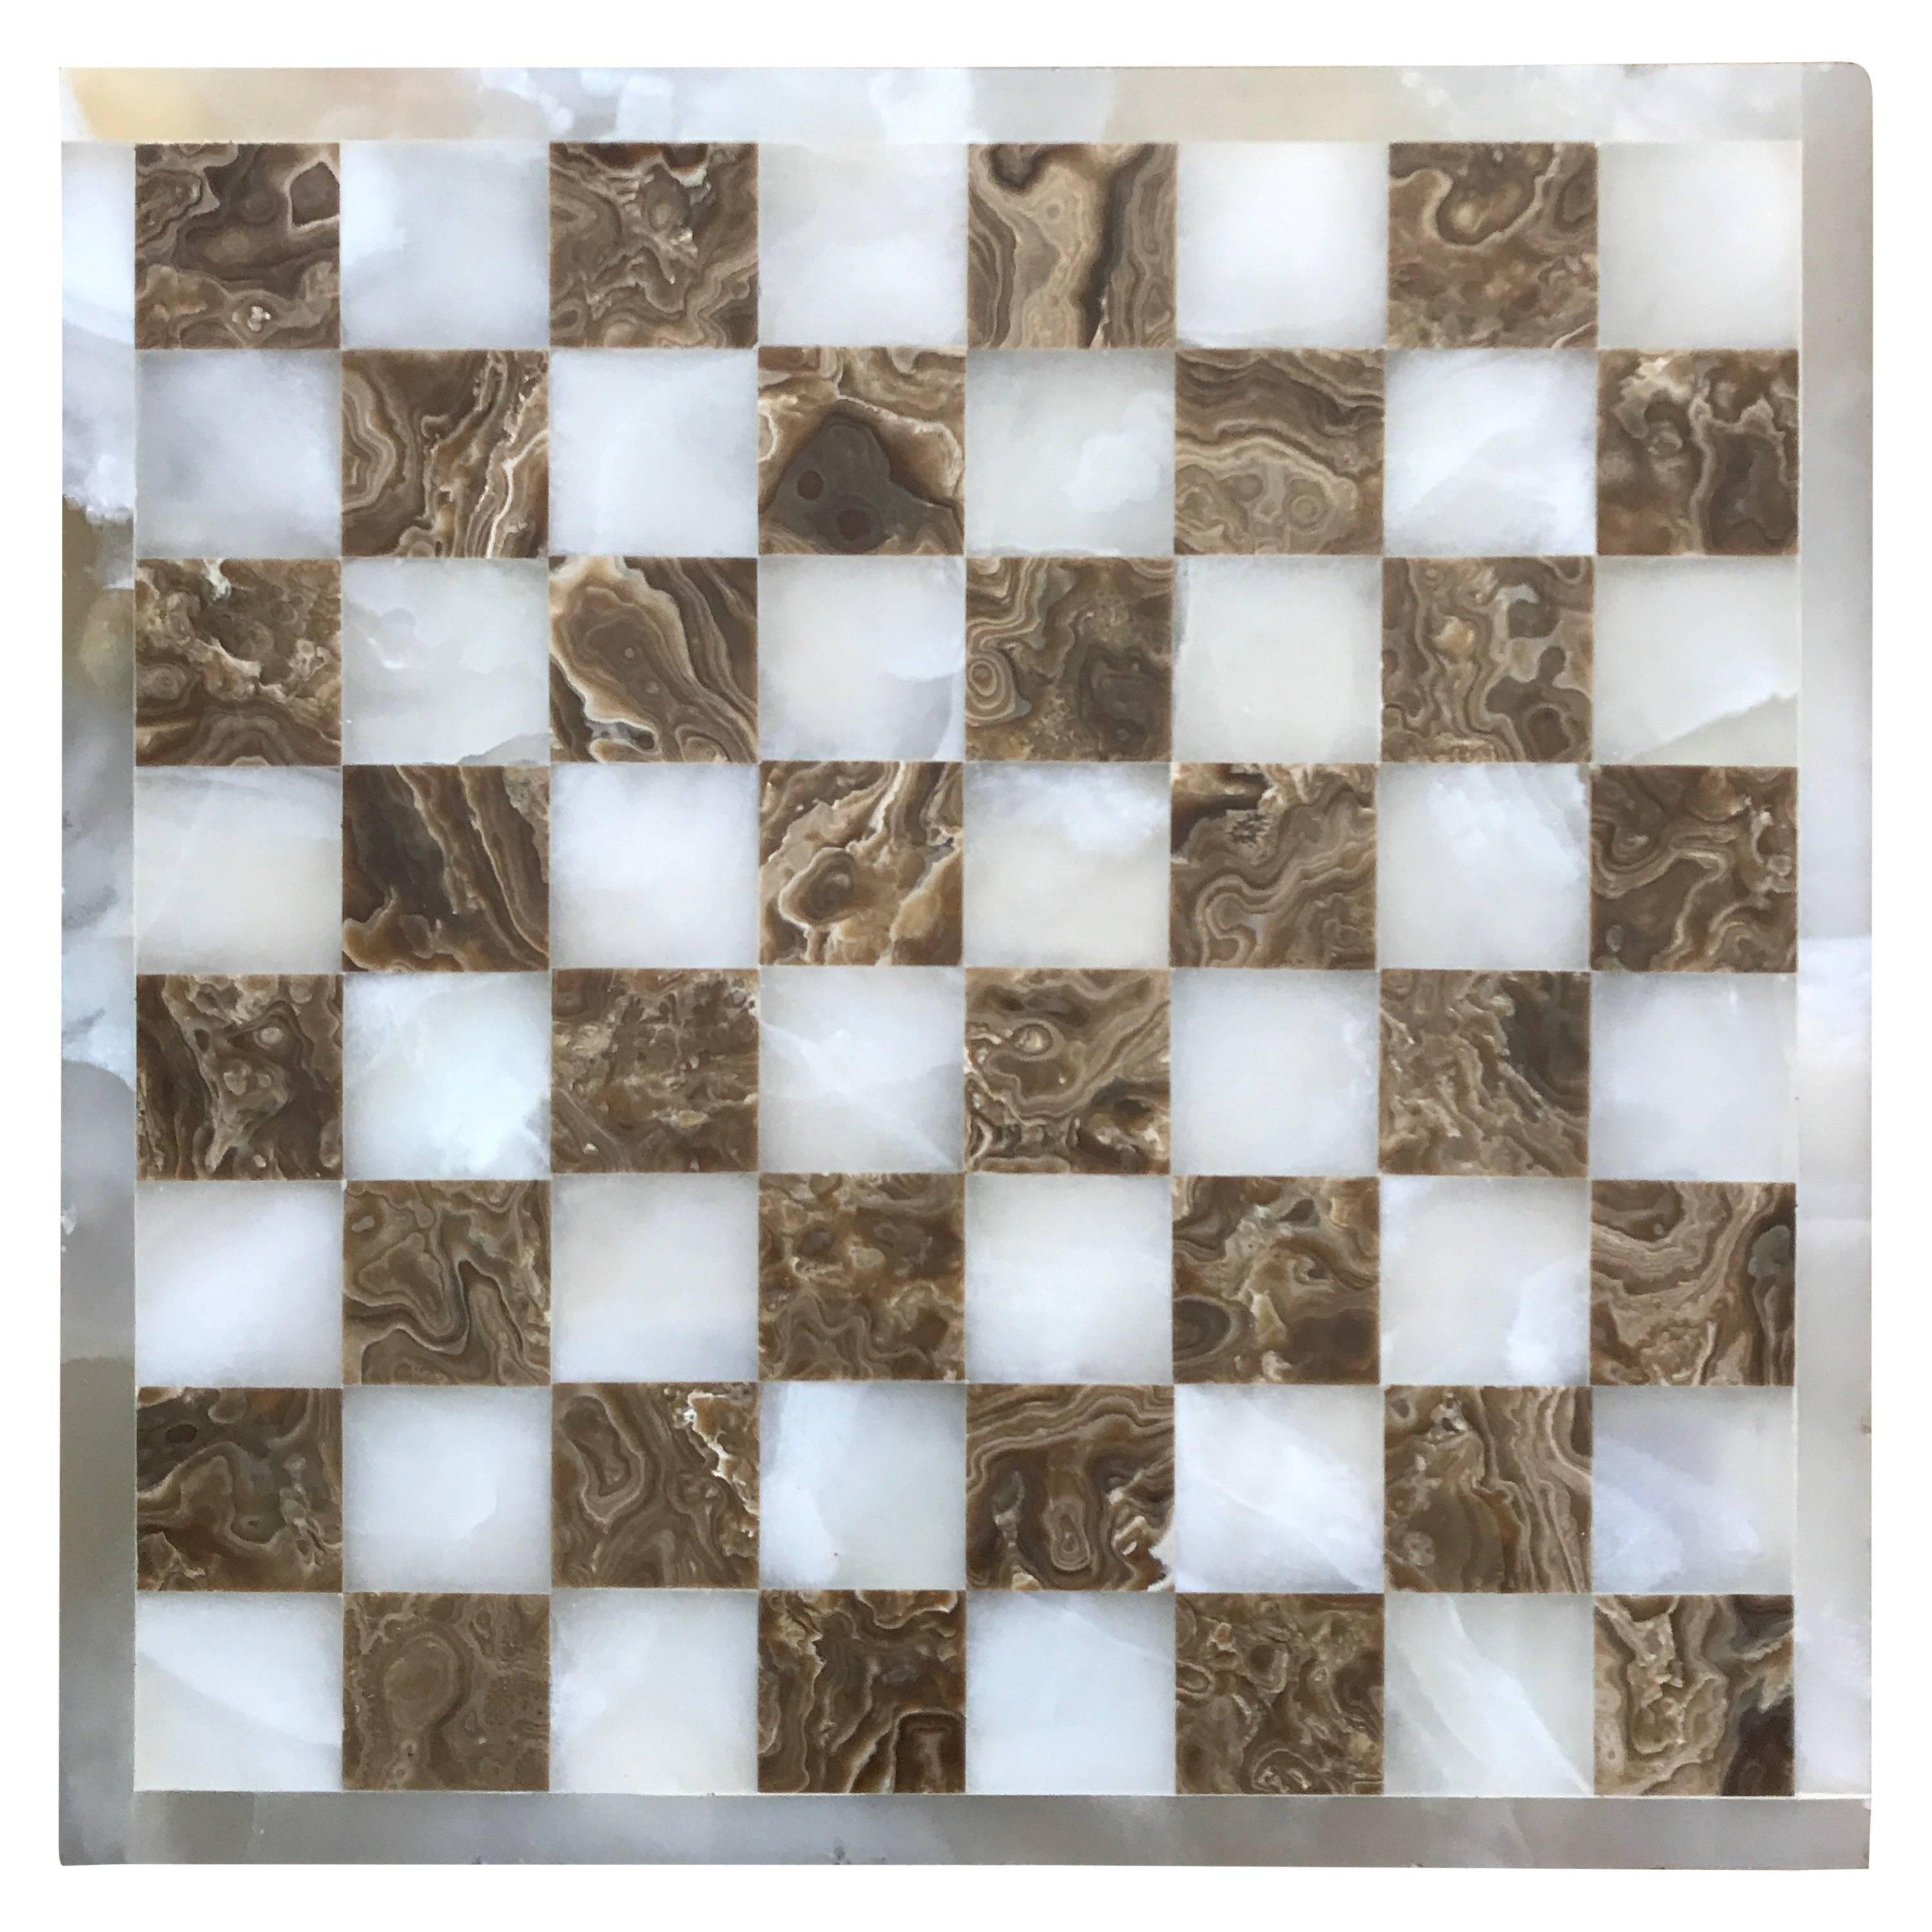 Onyx Game Board For Chess or Checkers